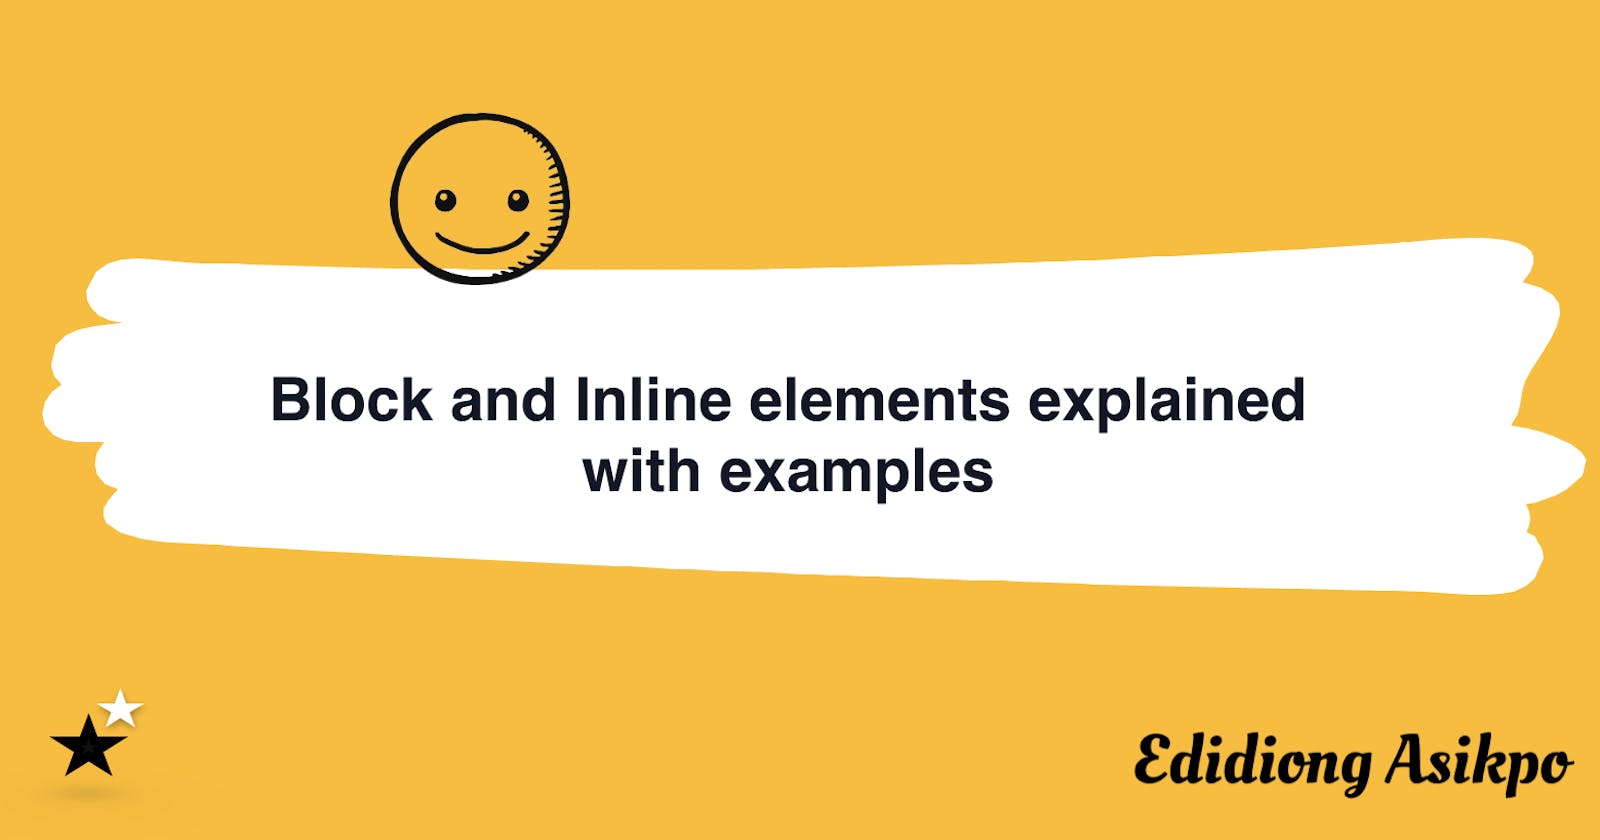 Block and Inline Elements Explained - With Examples